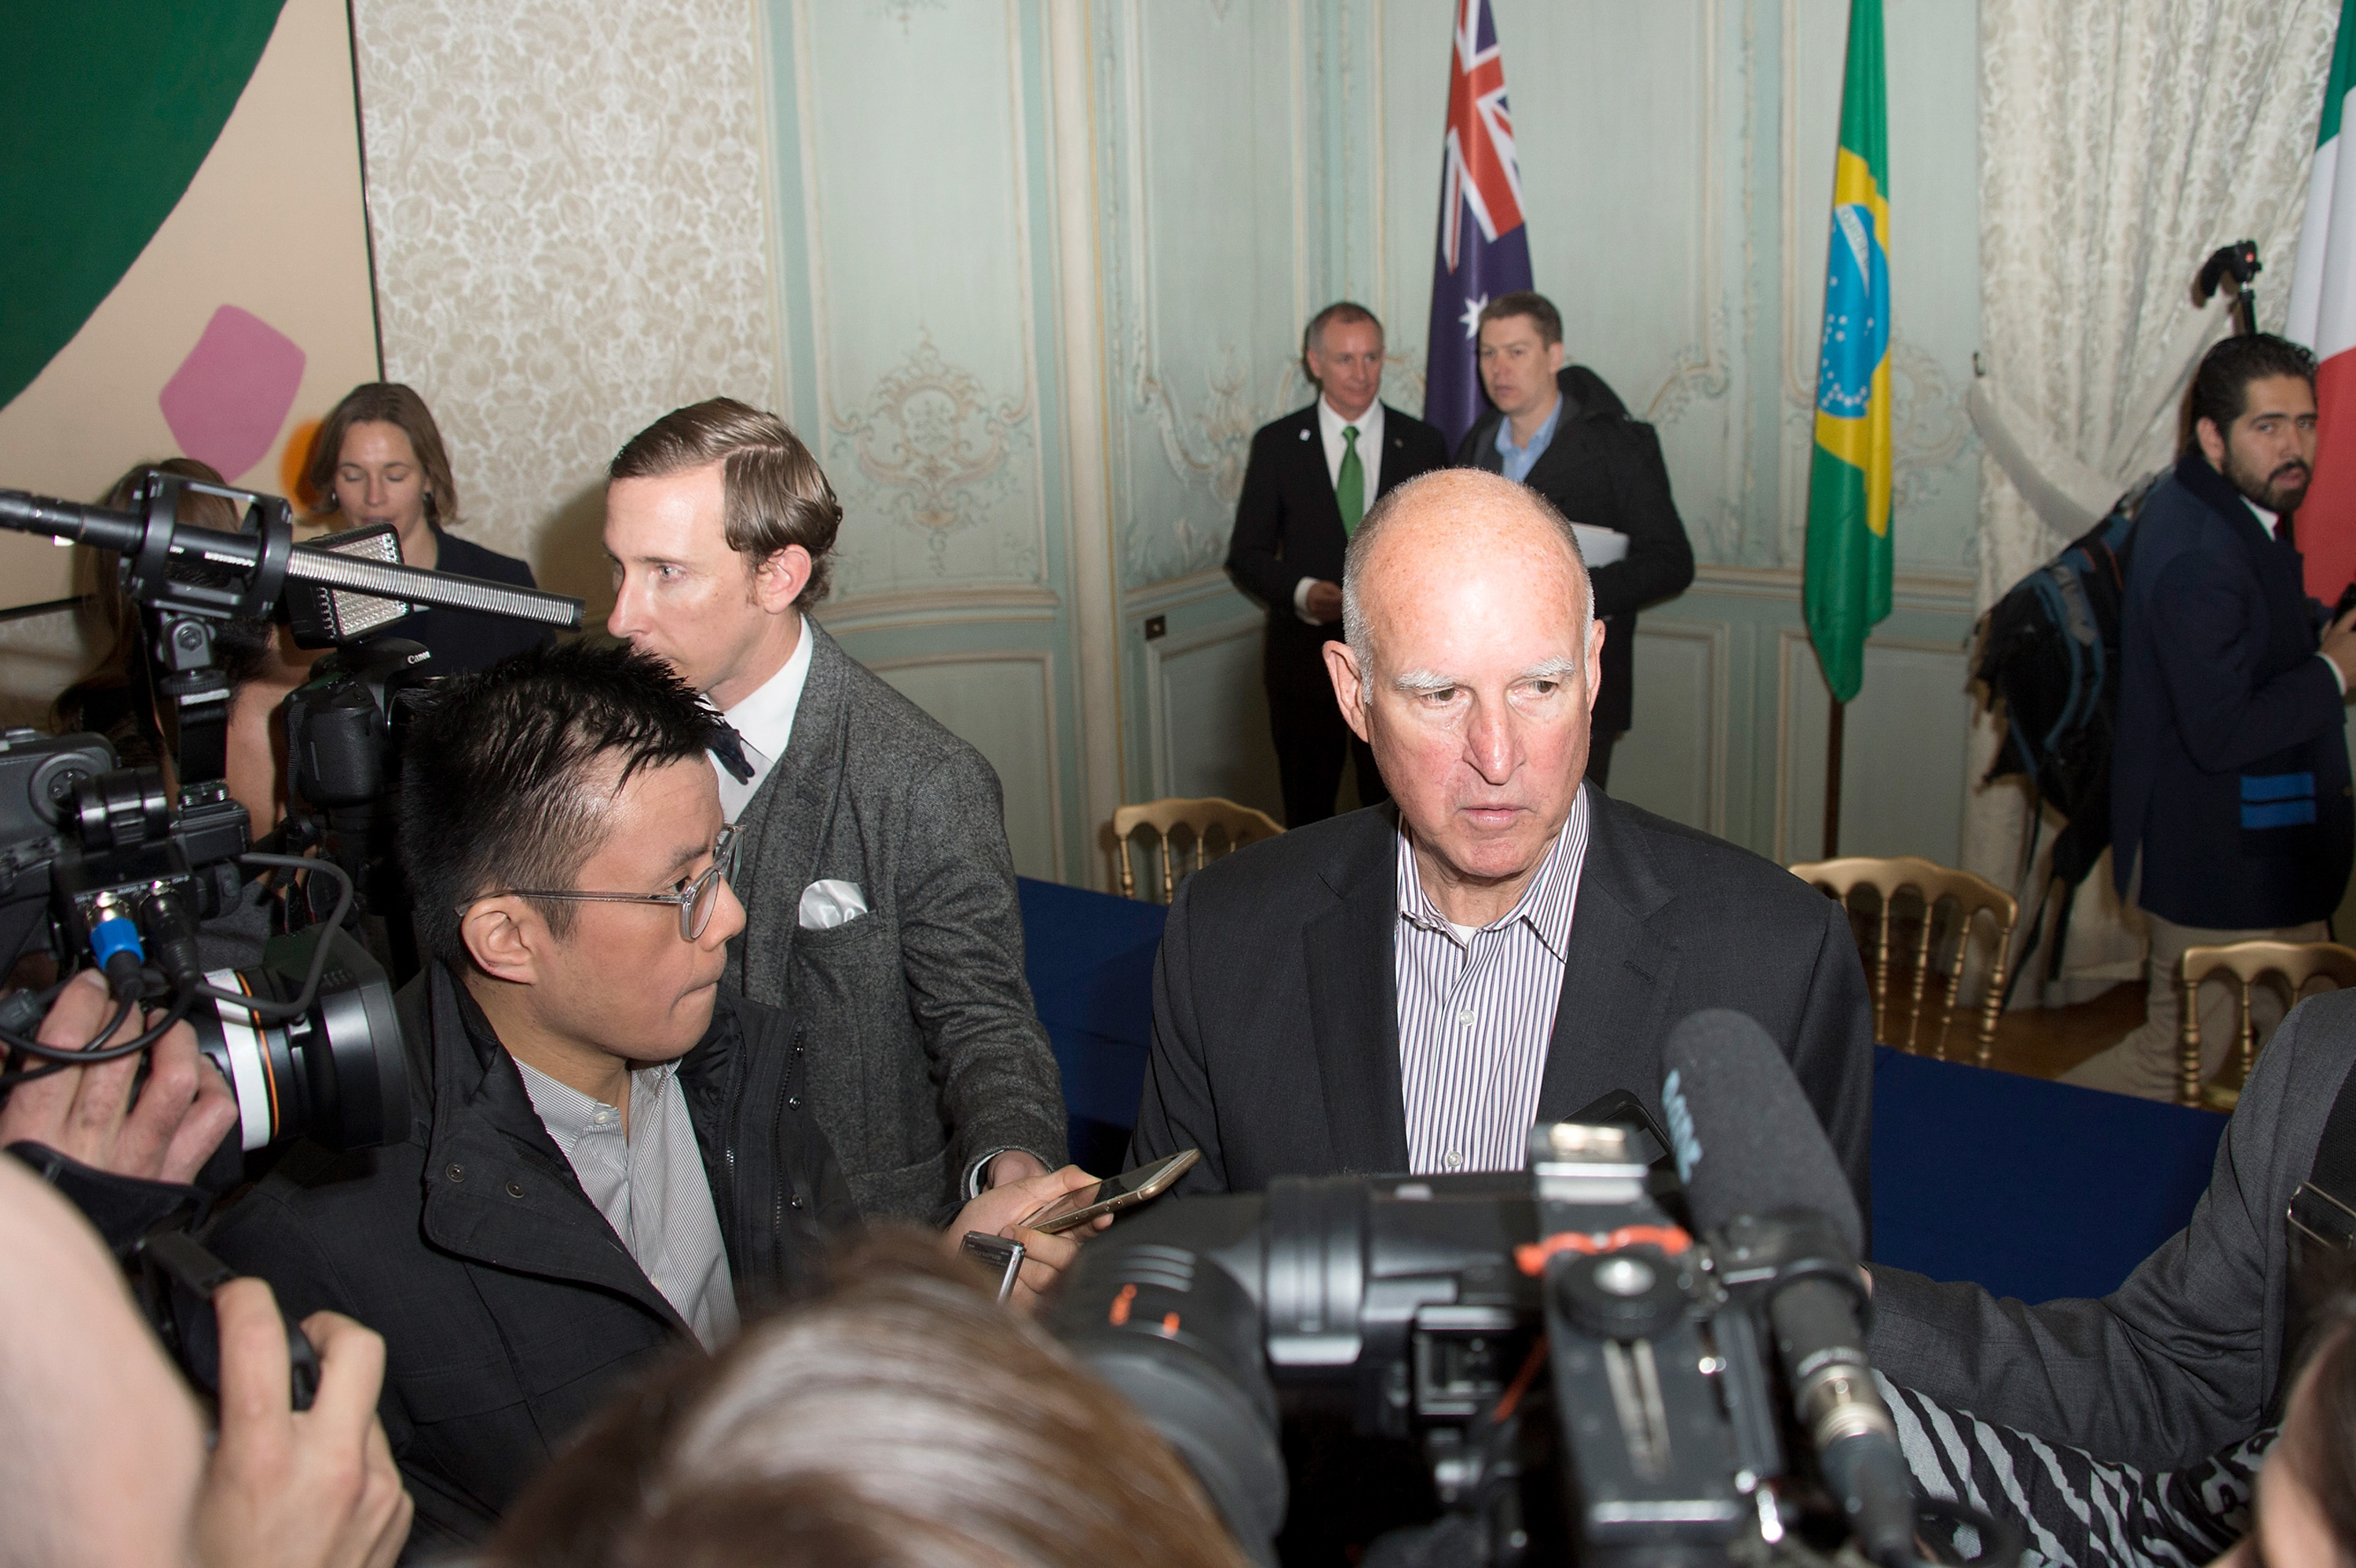 California Governor Jerry Brown speaks to the press after the signing of the memorandum on subnational global climate leadership on Dec. 6, 2015 in Paris. (Aurelien Meunier—Getty Images)